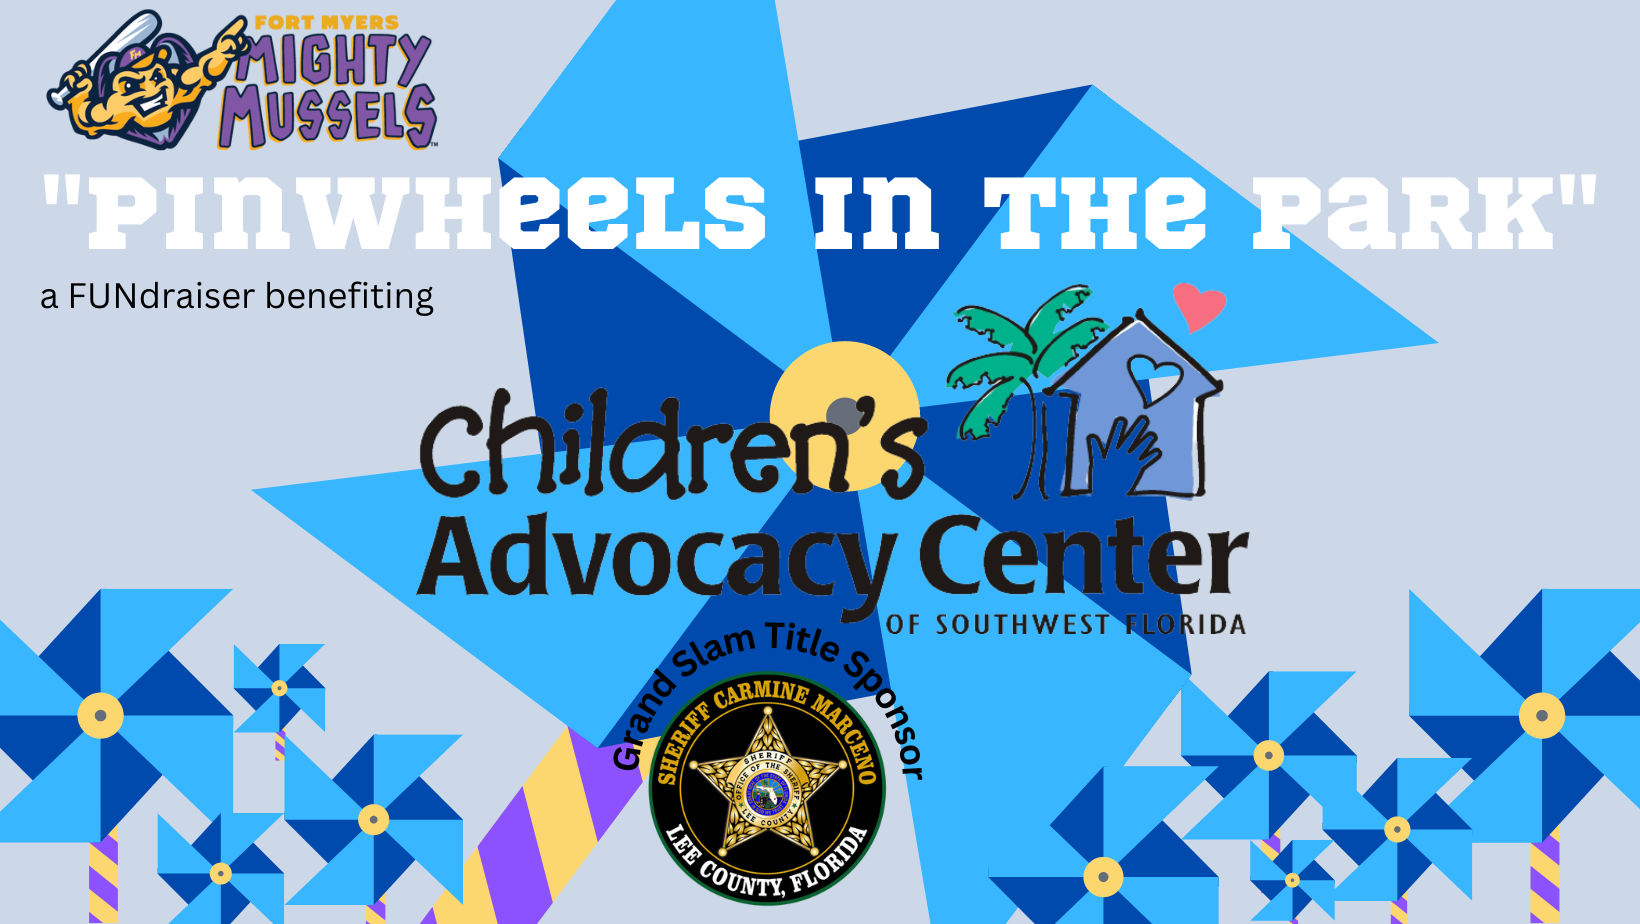 Children’s Advocacy Center accepting sponsorships for Pinwheels in the Park event with Mighty Mussels